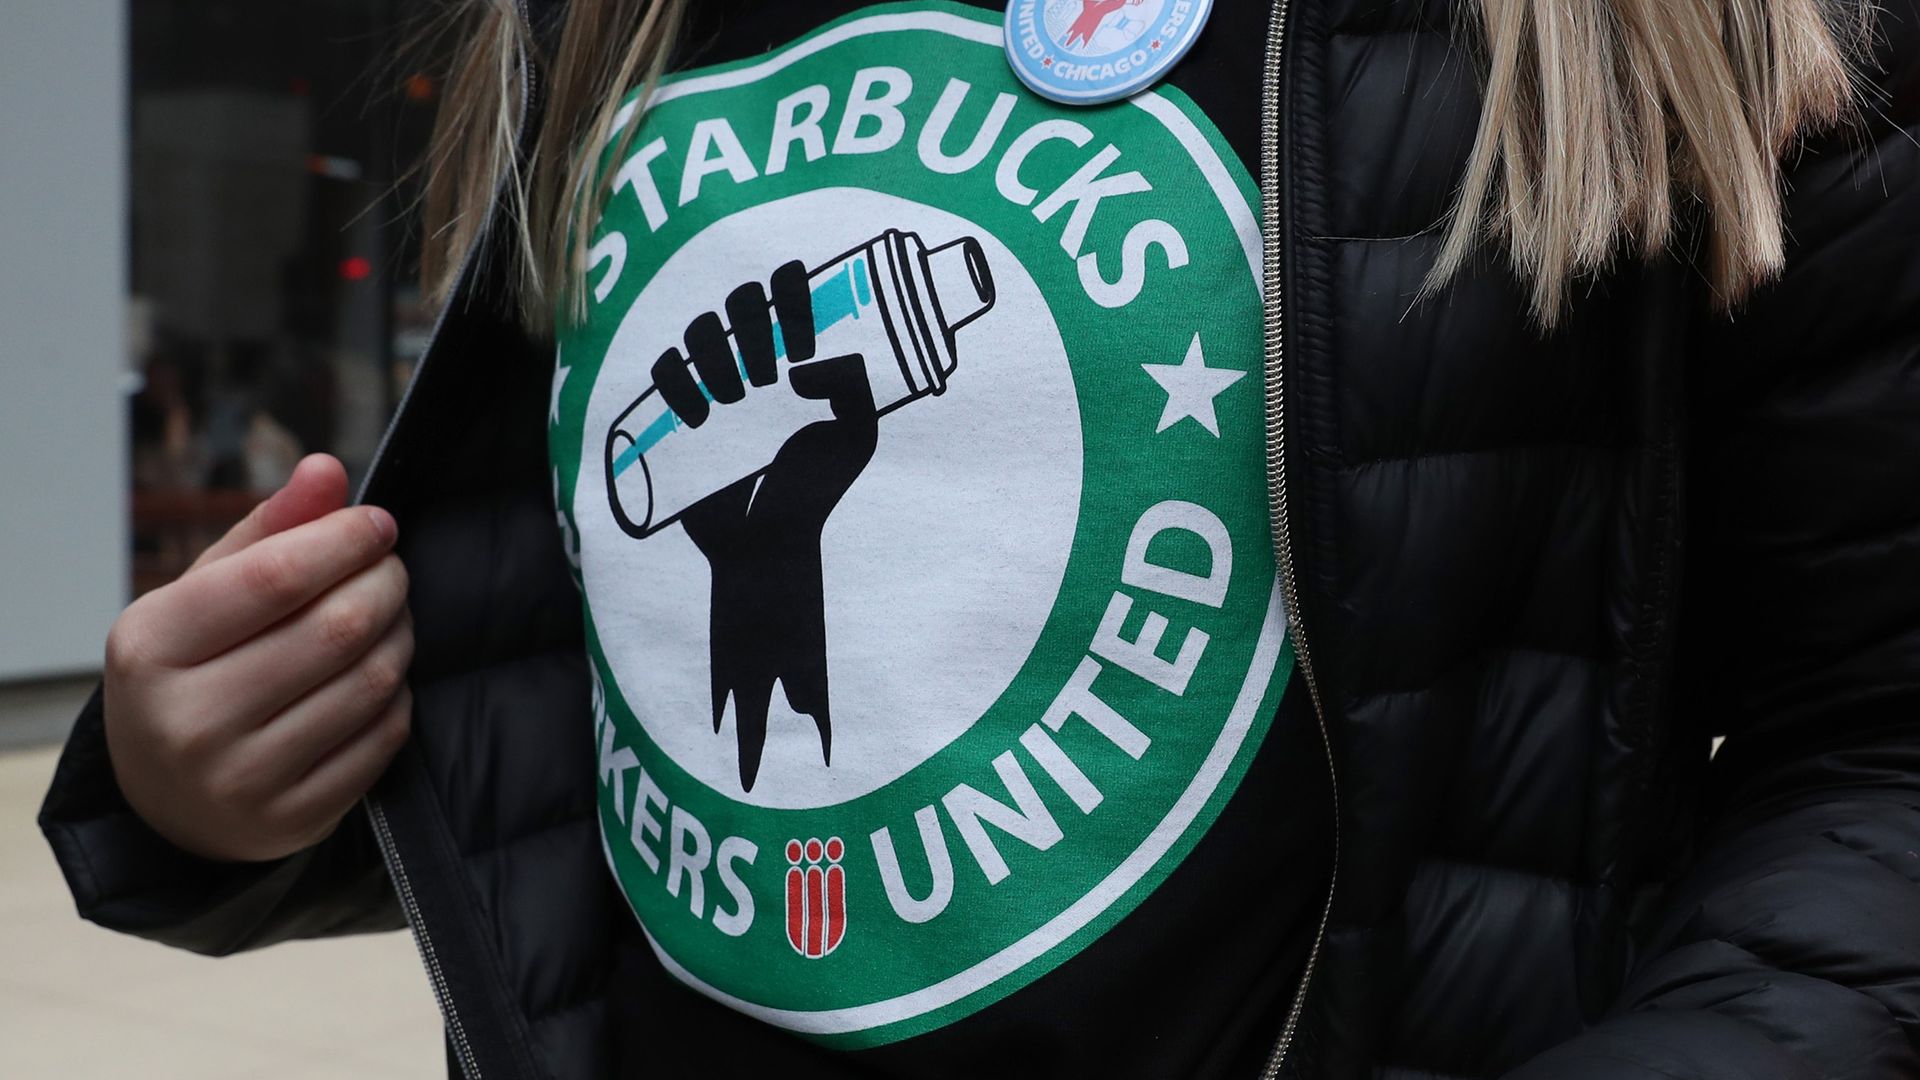 A Starbucks worker wears a t-shirt and button promoting unionization